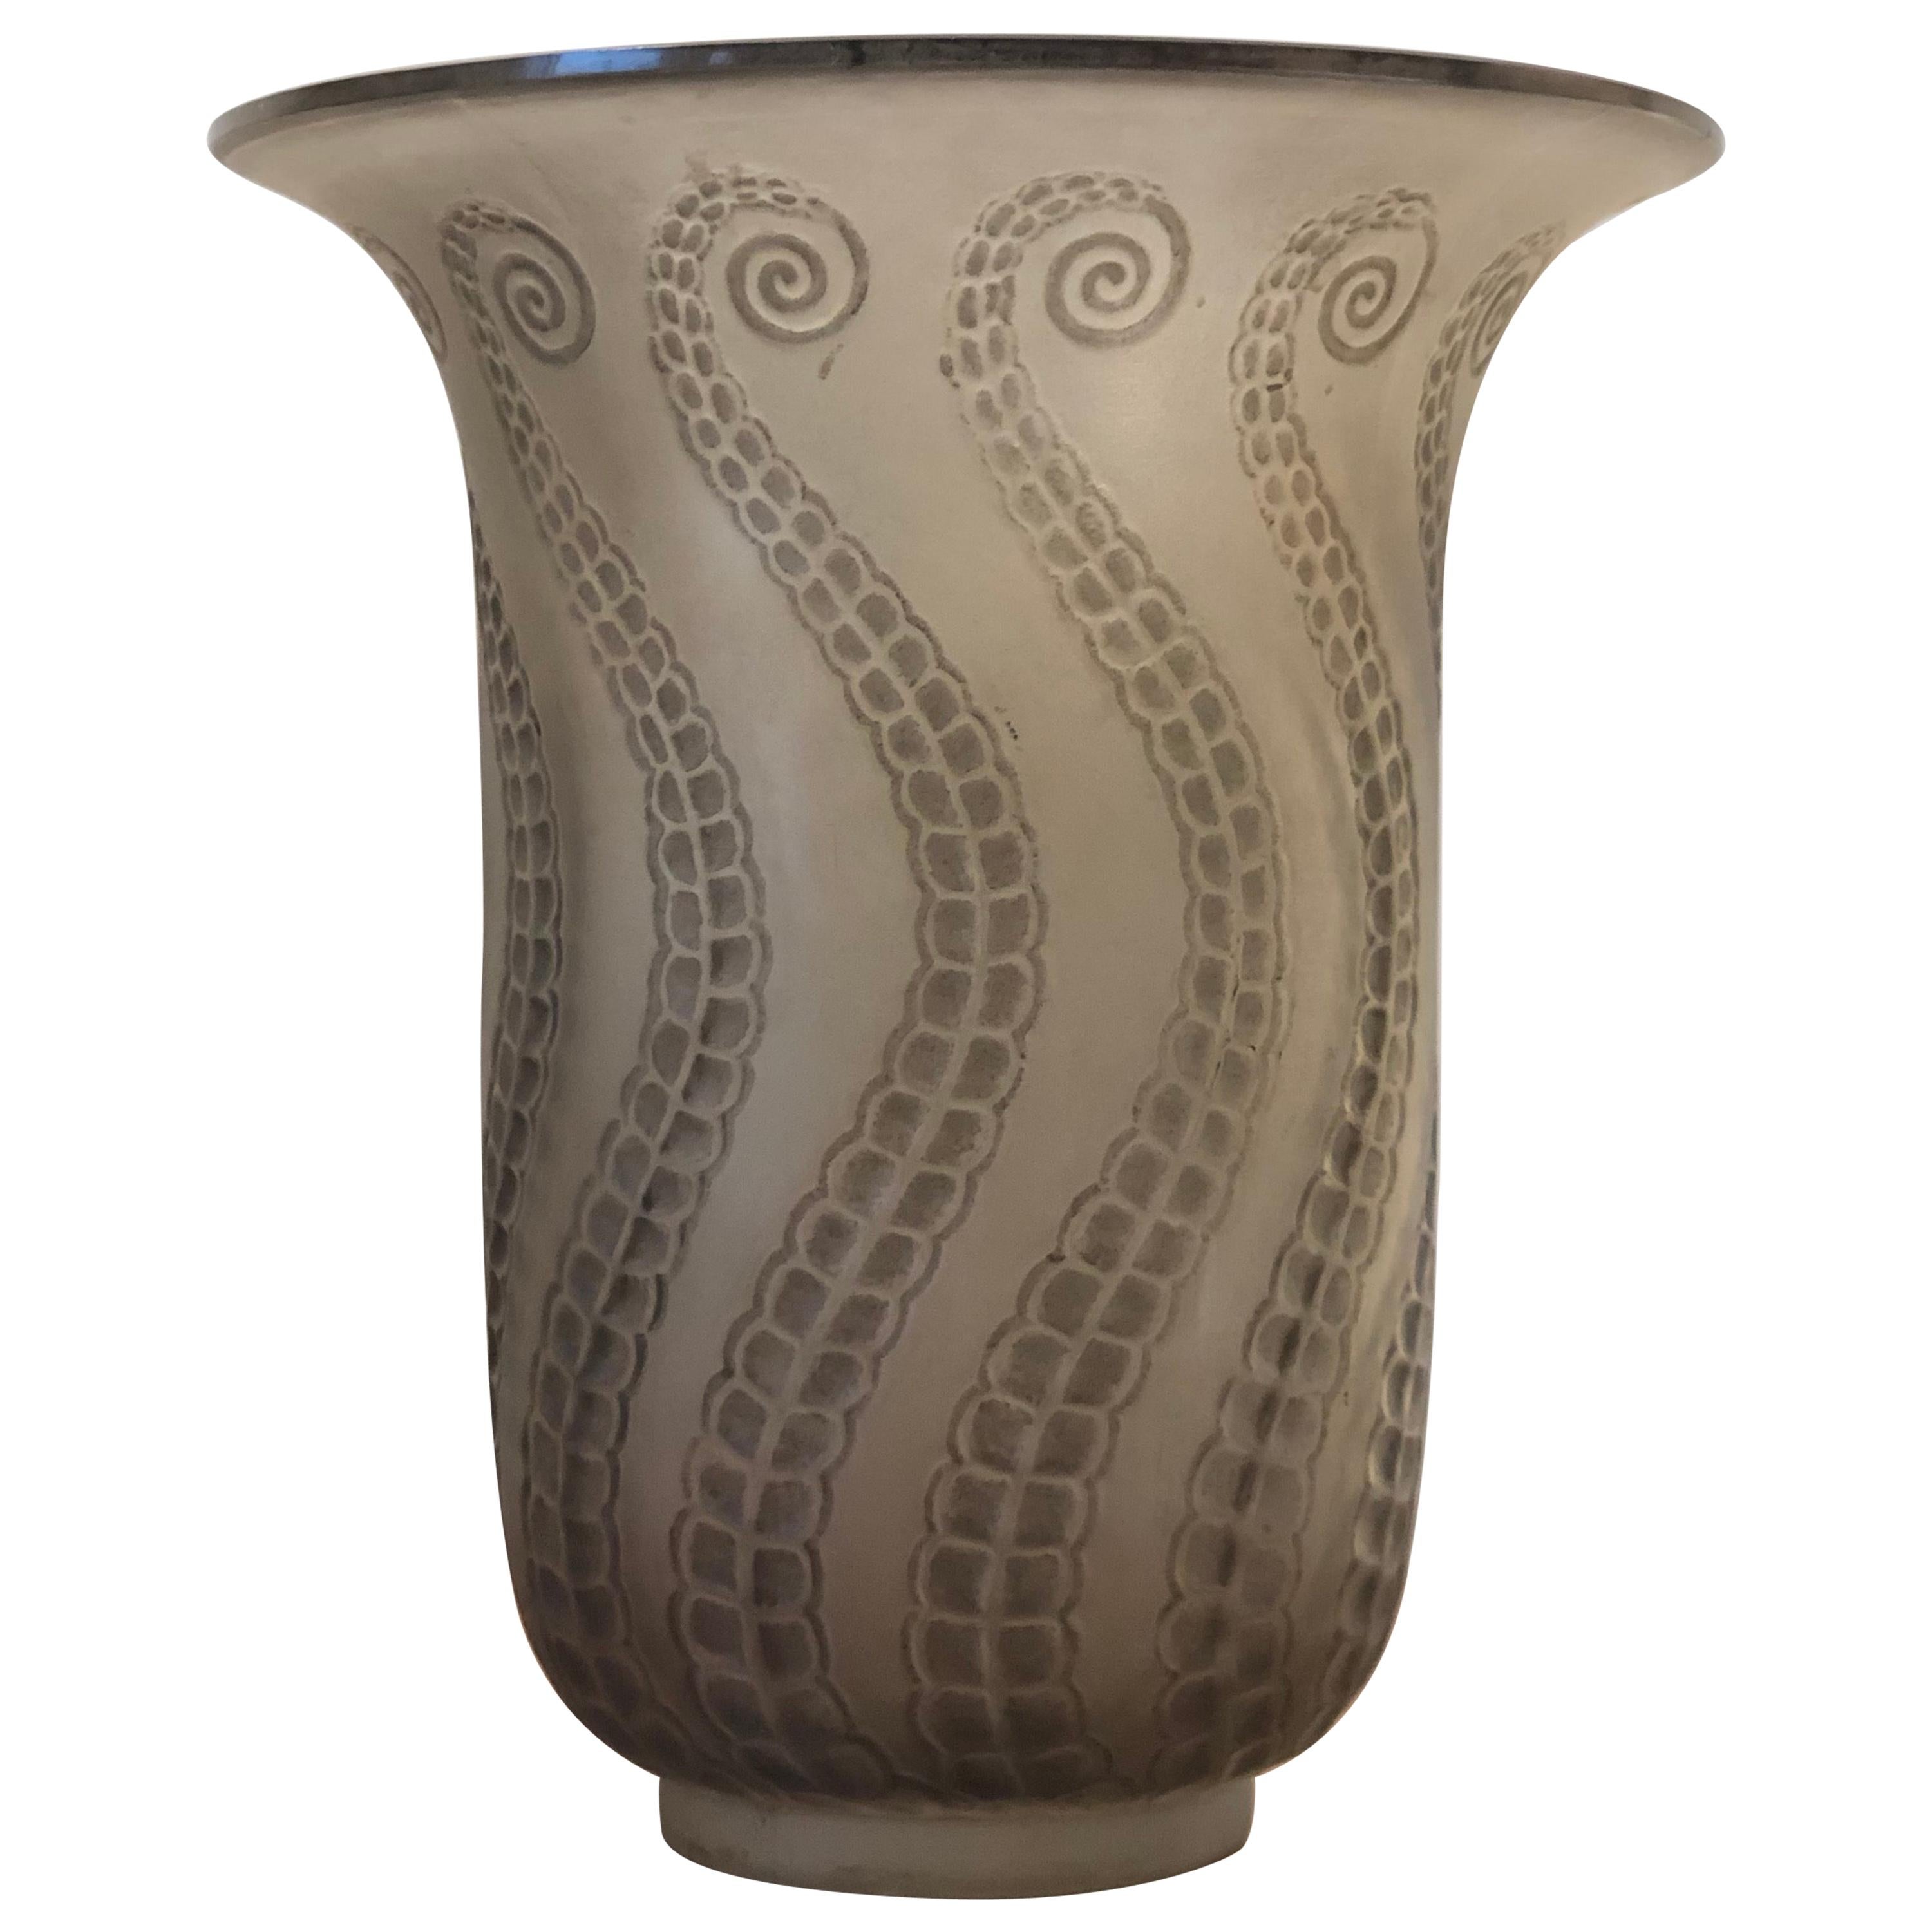 1921 René Lalique Meduse Vase in Grey Glass with Grey Patina